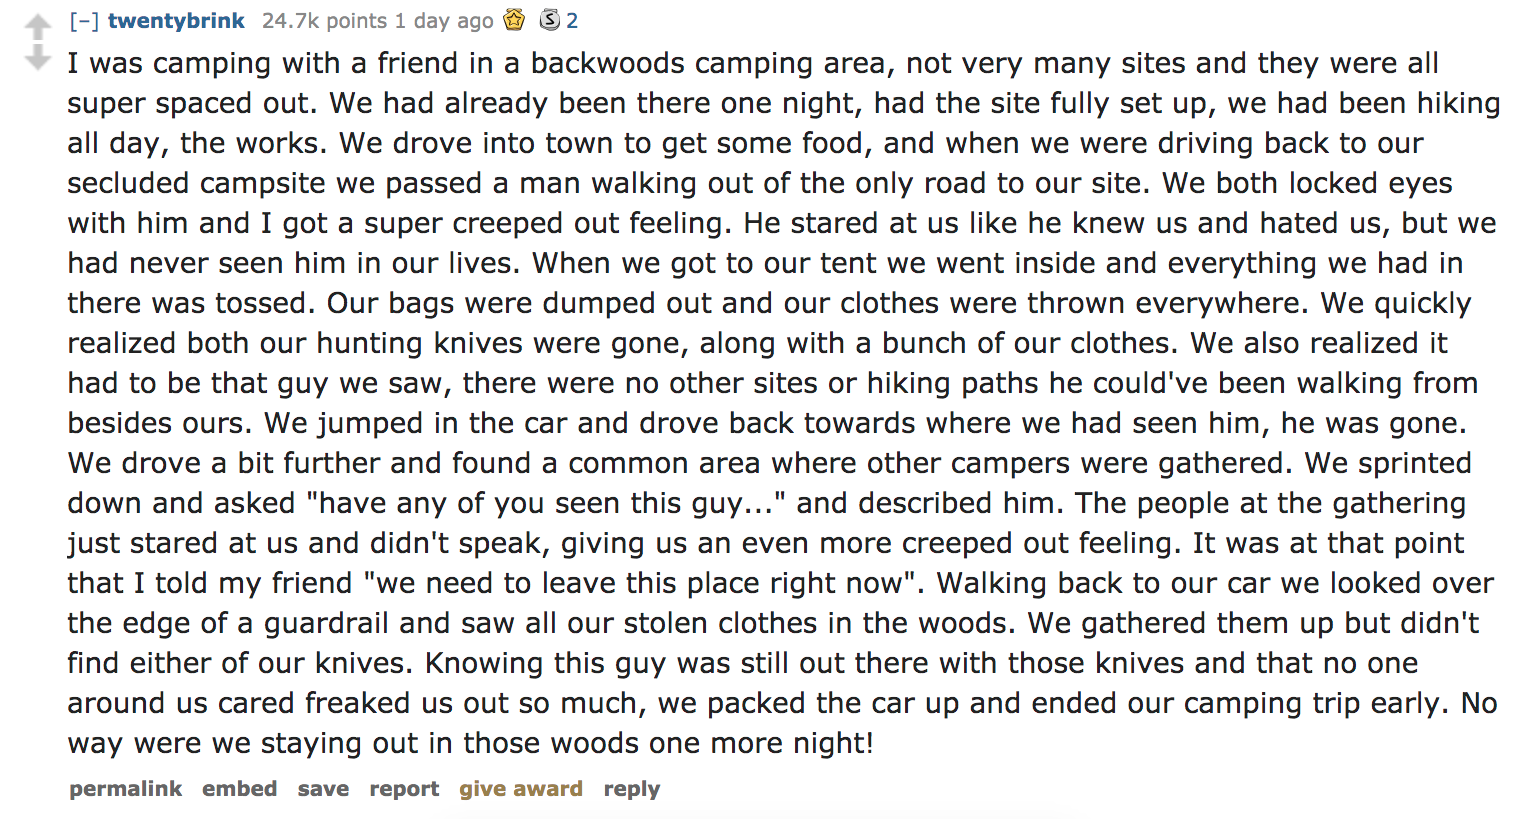 Ask Reddit - I was camping with a friend in a backwoods camping area, not very many sites and they were all super spaced out. We had already been there one night, had the site fully set up, we had been h